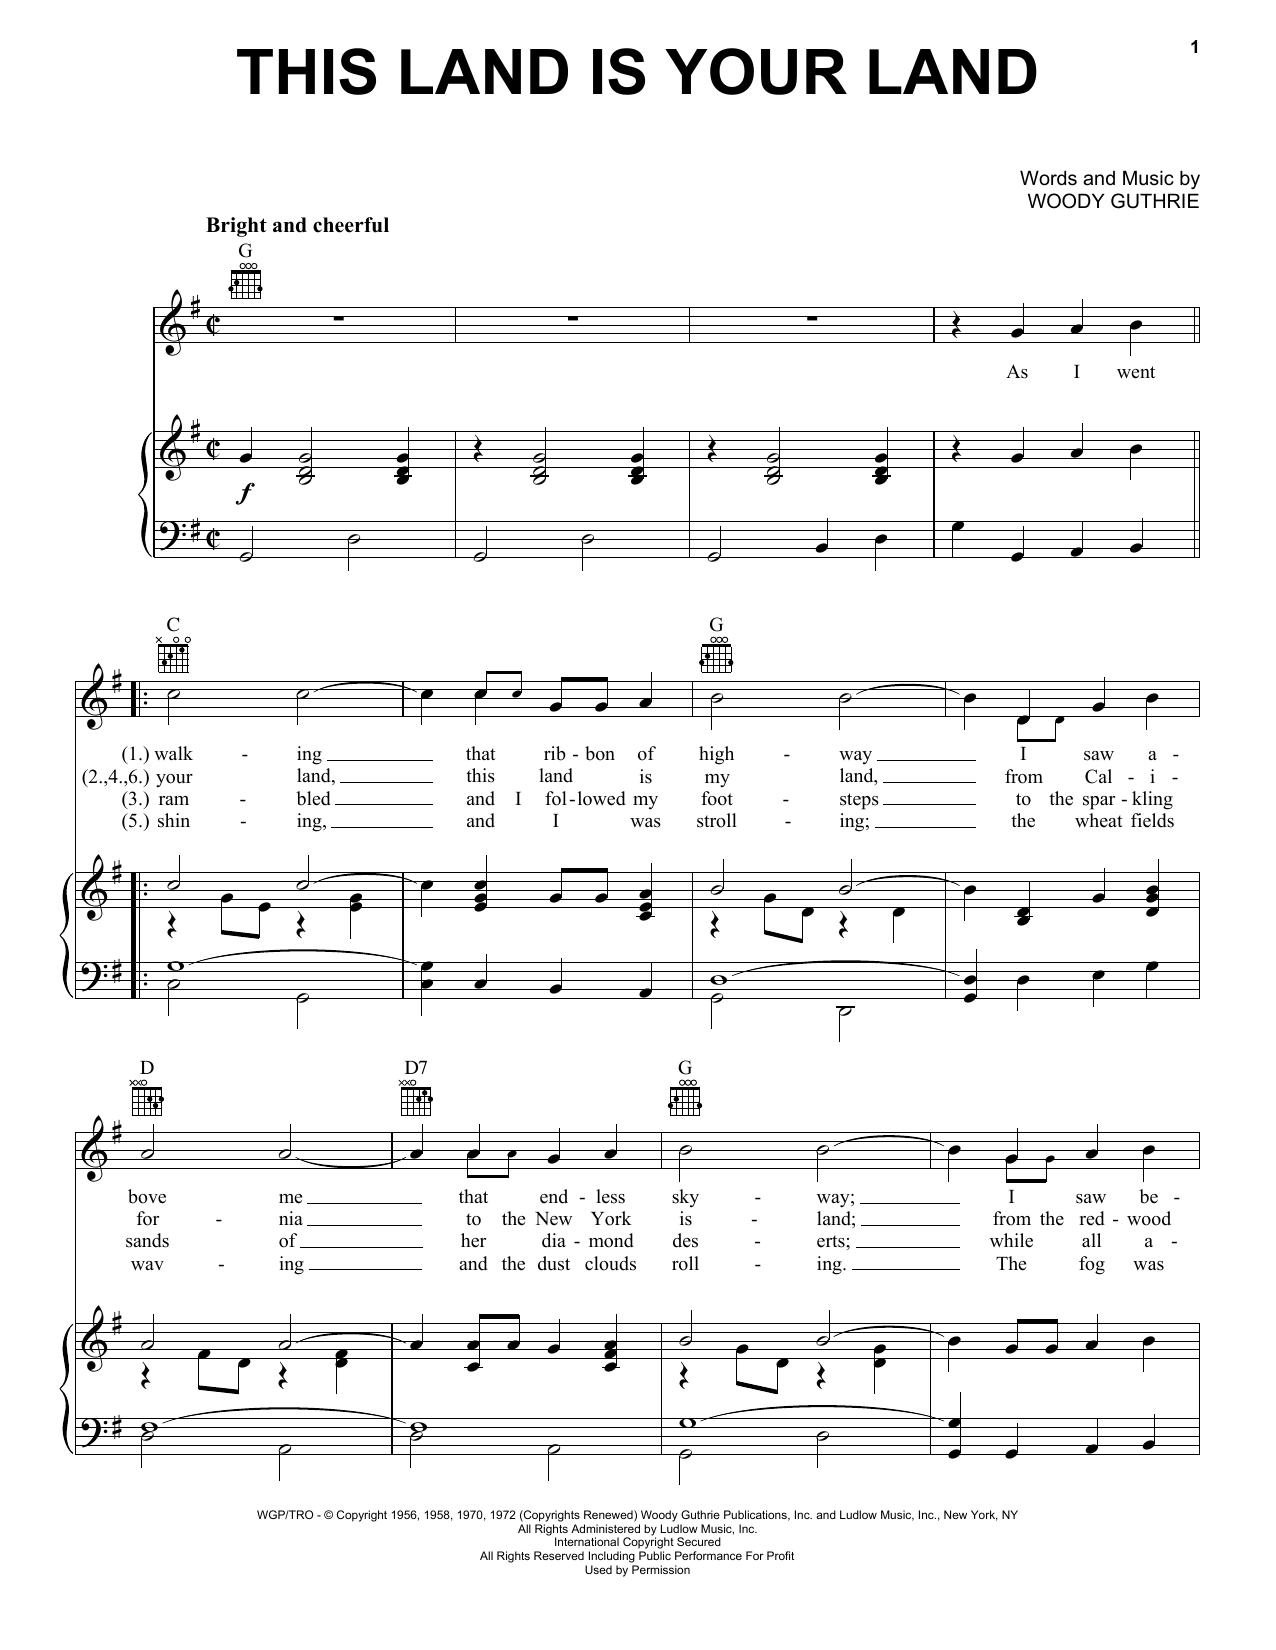 Woody Guthrie This Land Is Your Land sheet music notes and chords. Download Printable PDF.